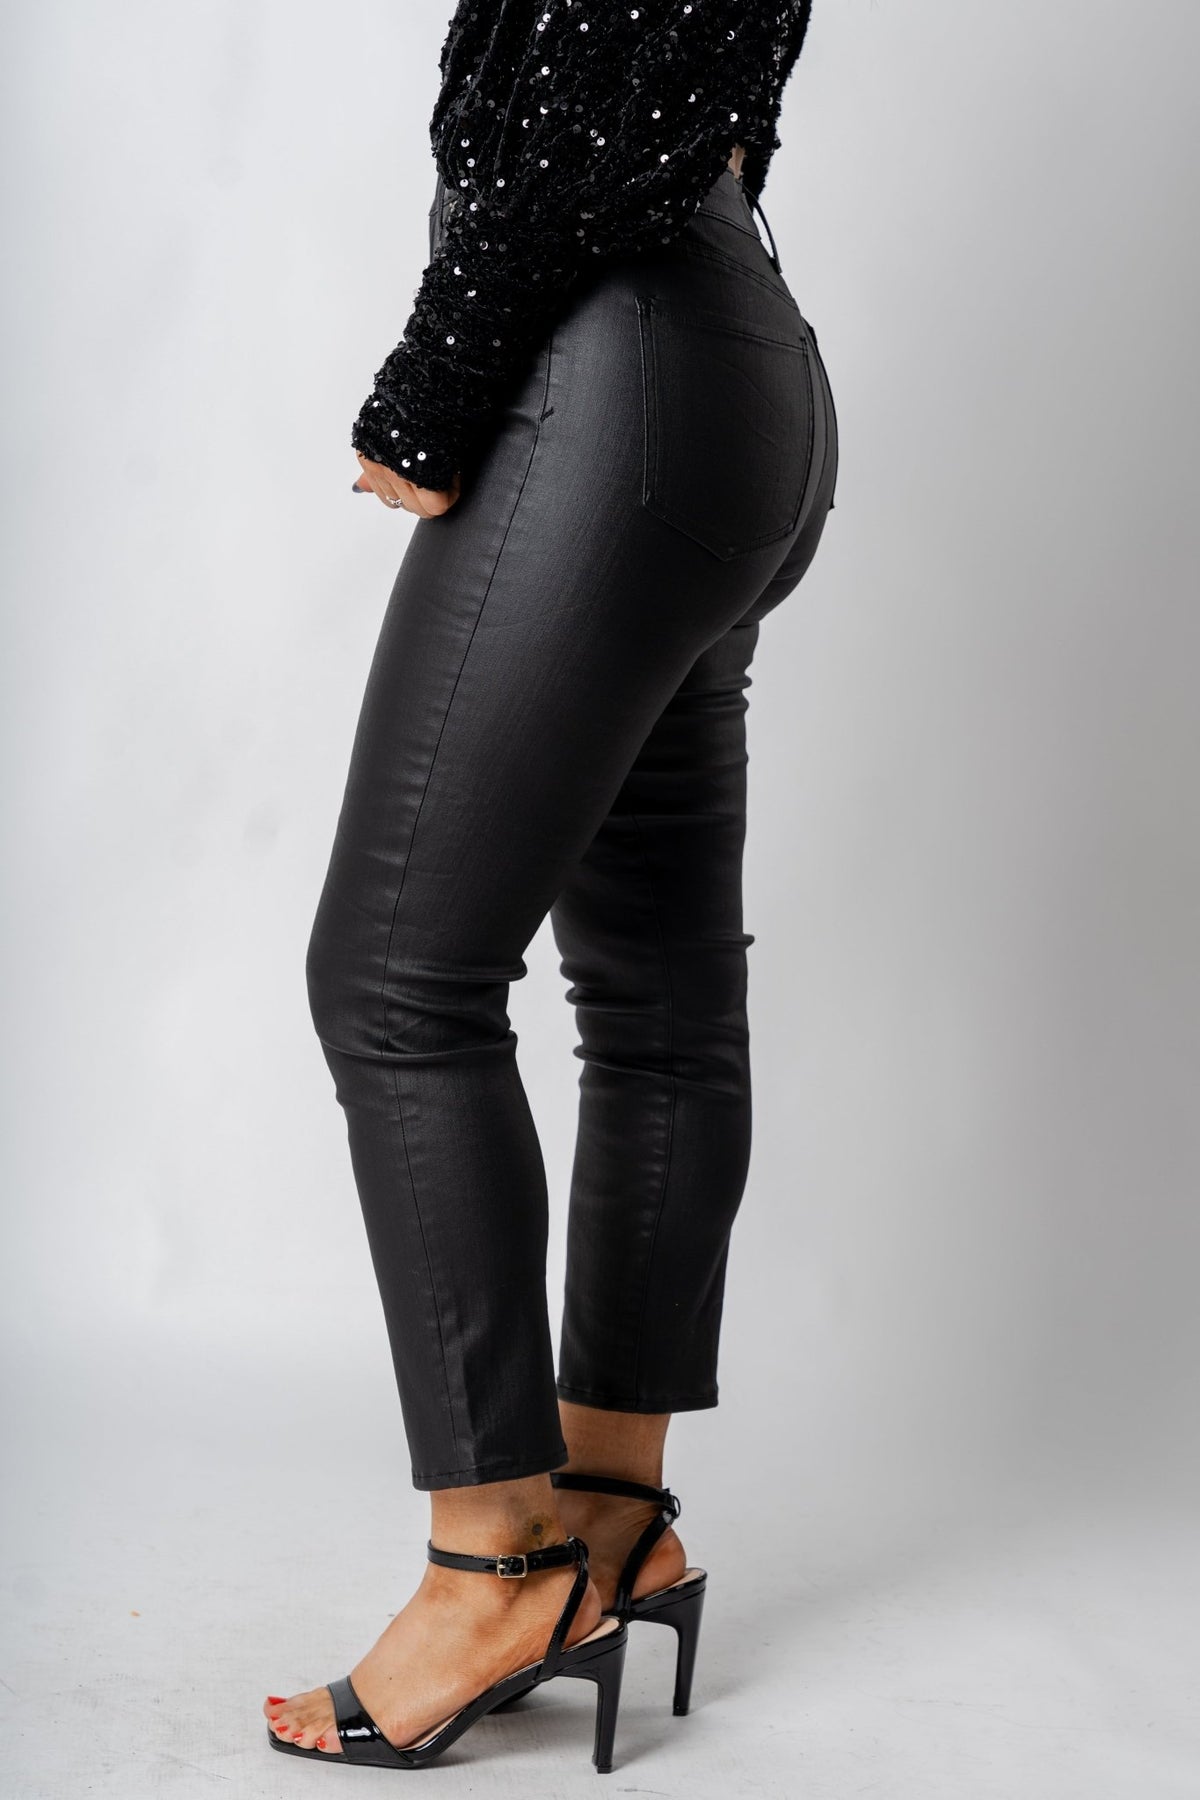 Daze daily drive high rise faux leather pants - Trendy New Year's Eve Outfits at Lush Fashion Lounge Boutique in Oklahoma City